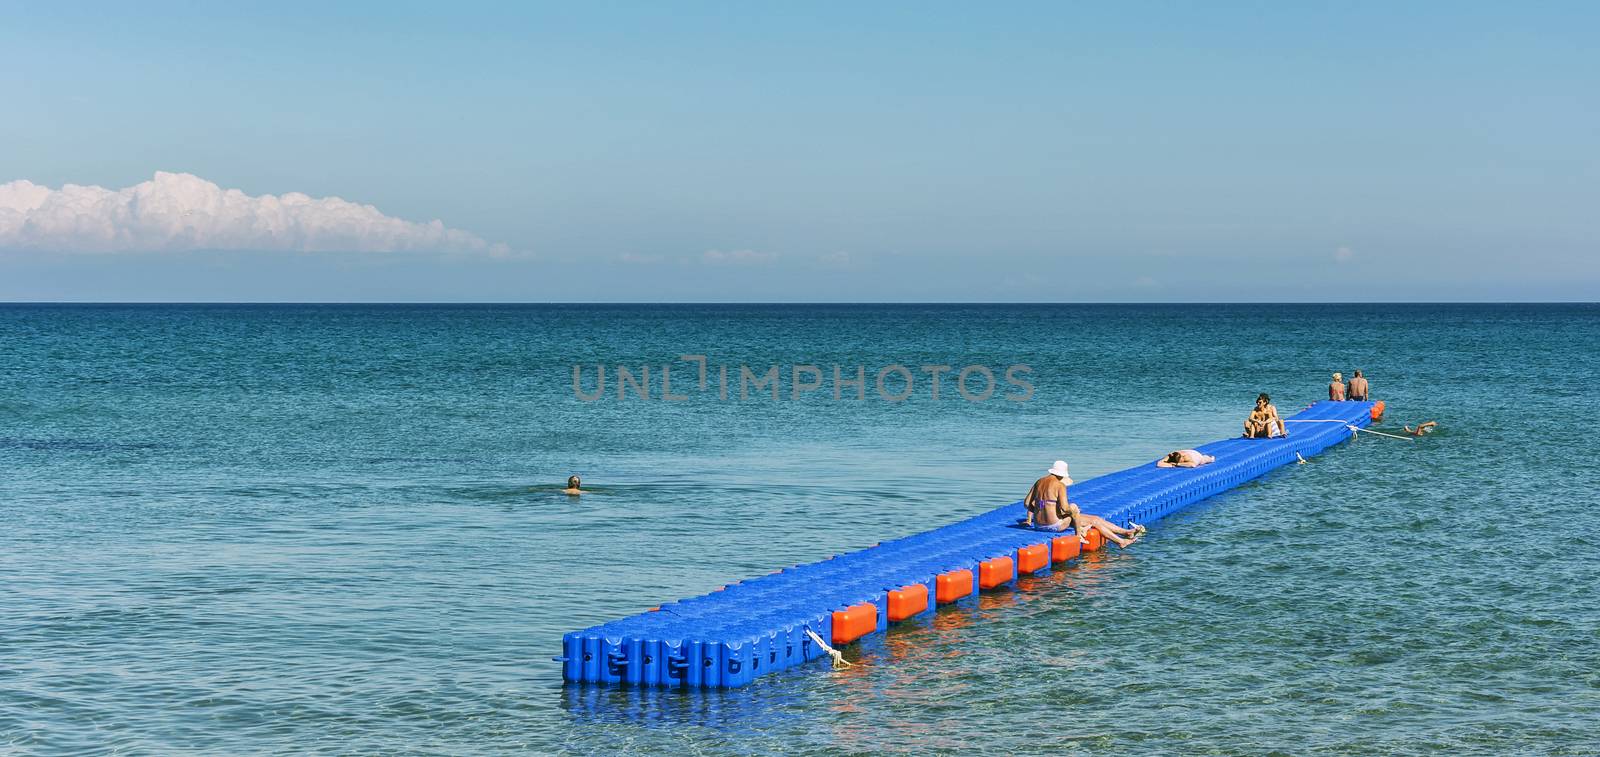 Zakynthos, Laganos - June 07, 2016: The pontoon jetty is installed in the sea. On the pontoon berth sunbathing vacationers